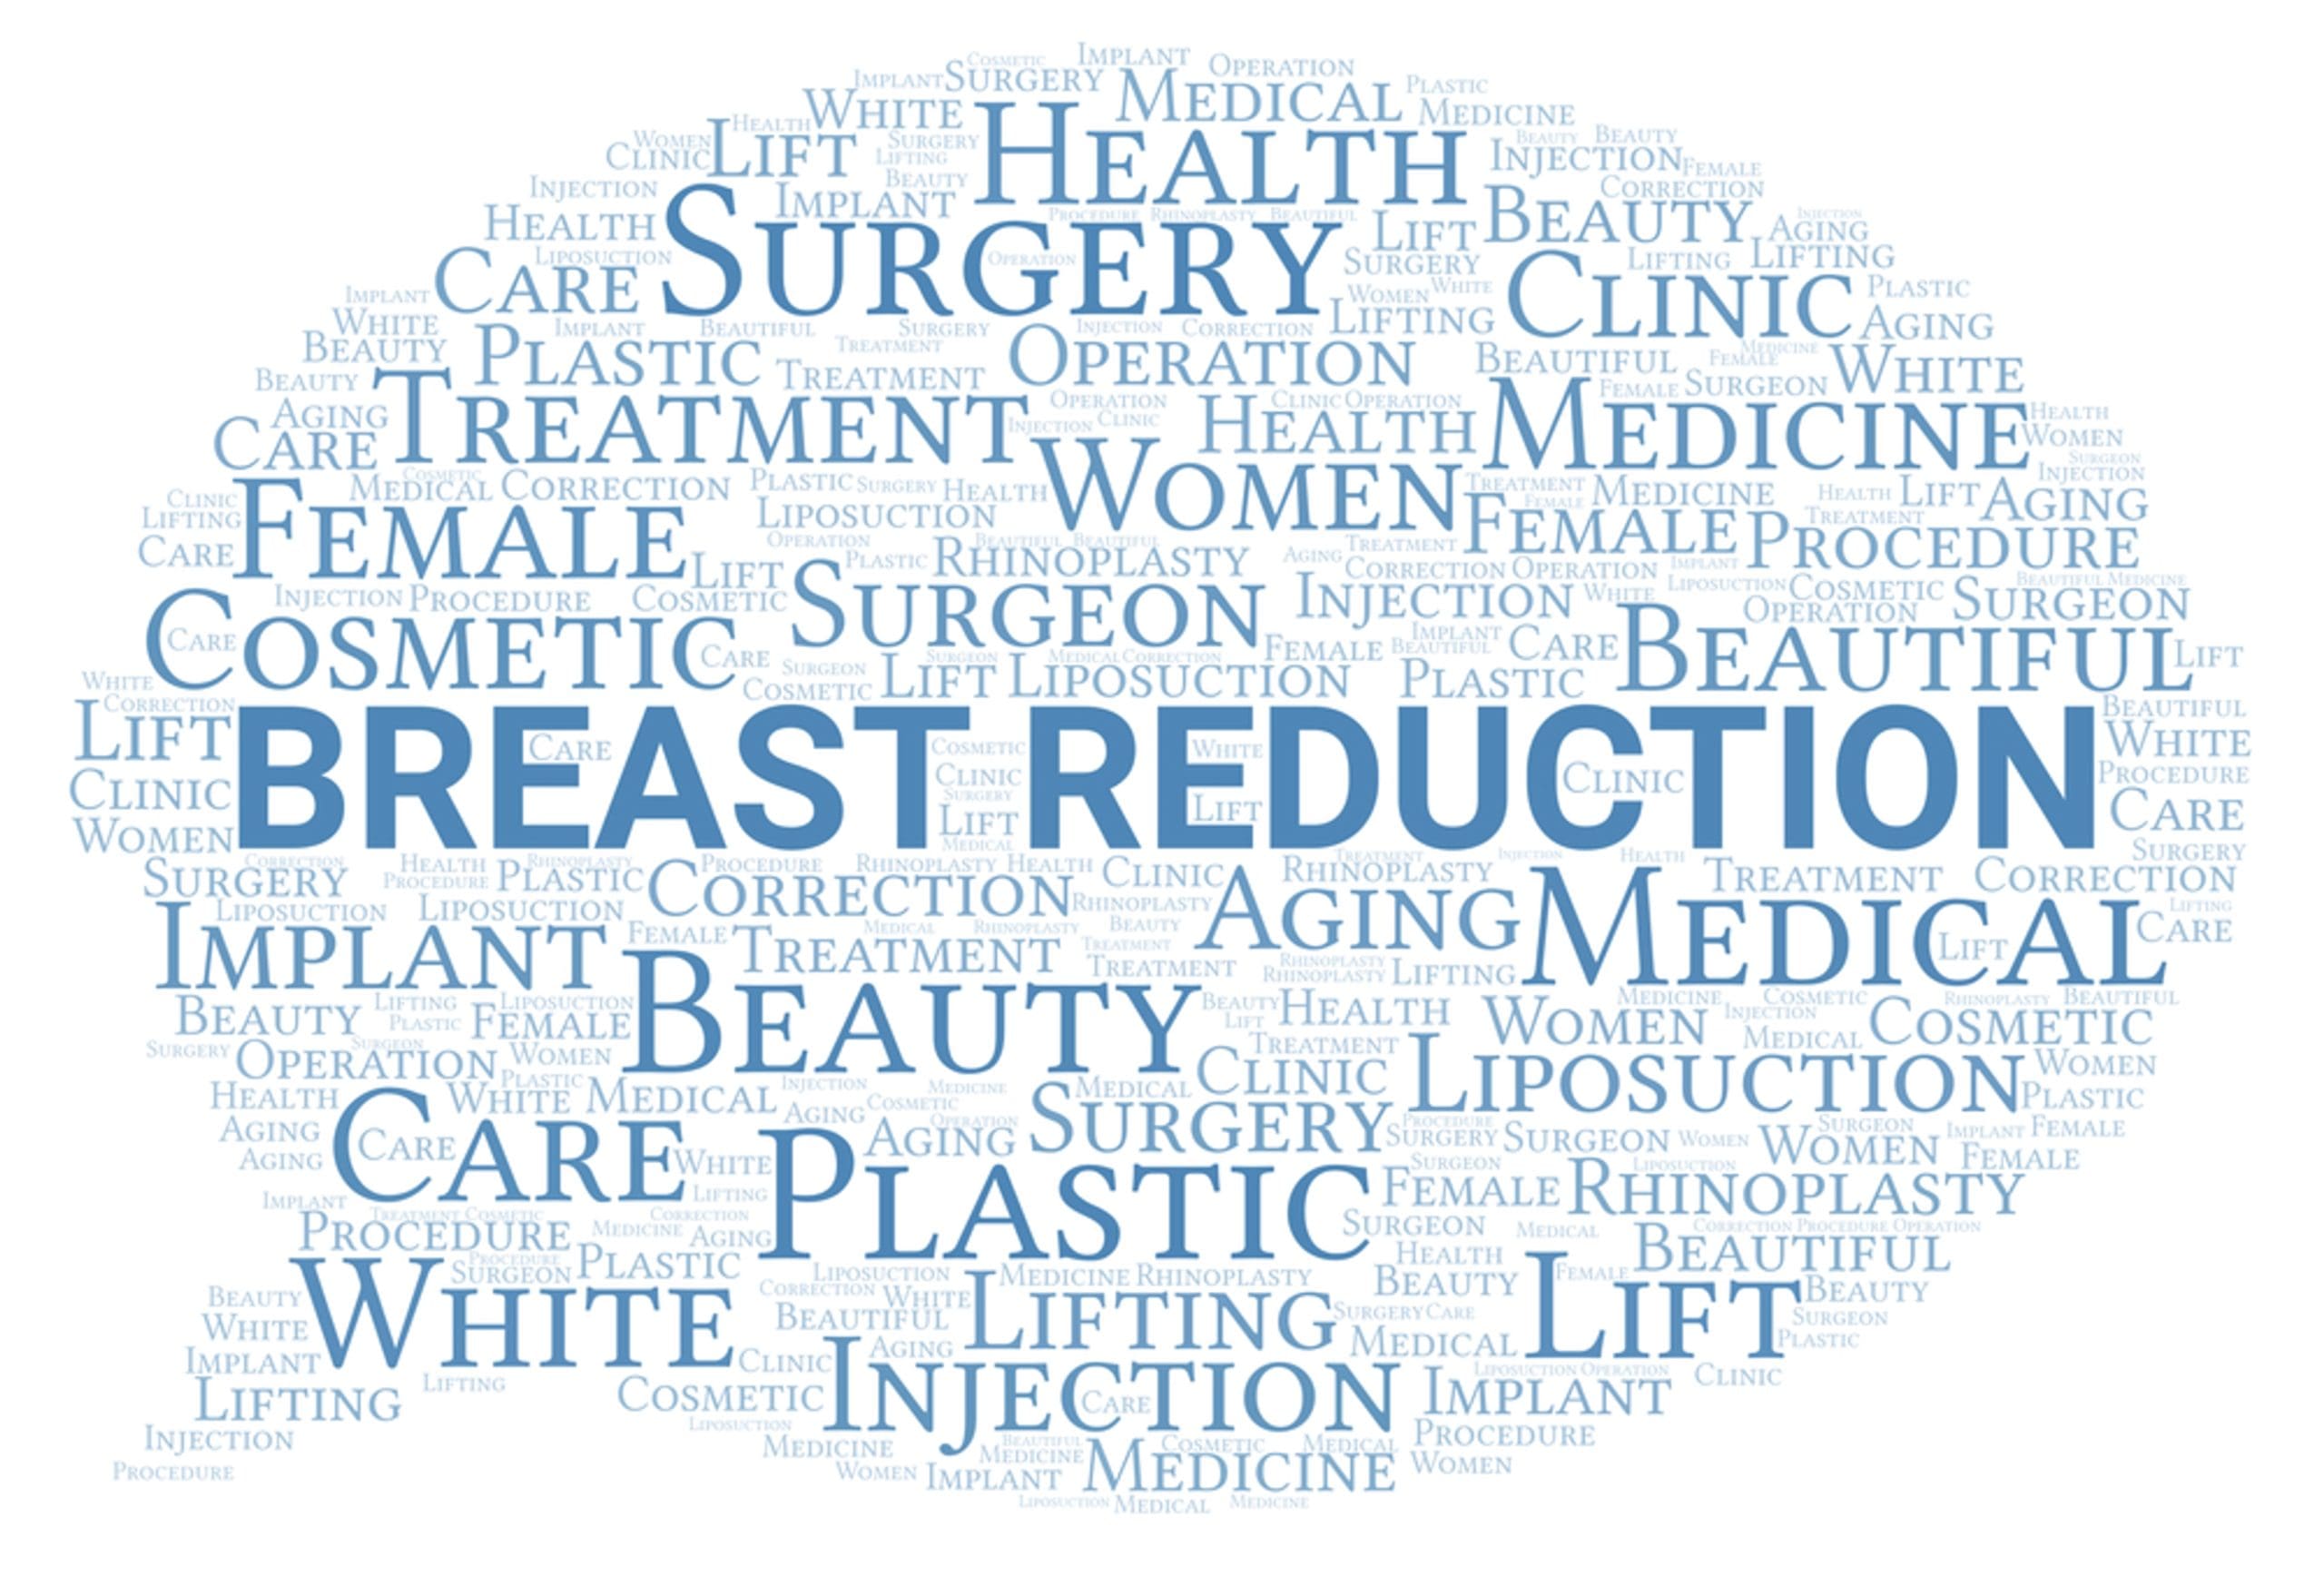 breast-reduction-surgery-scaled.jpg